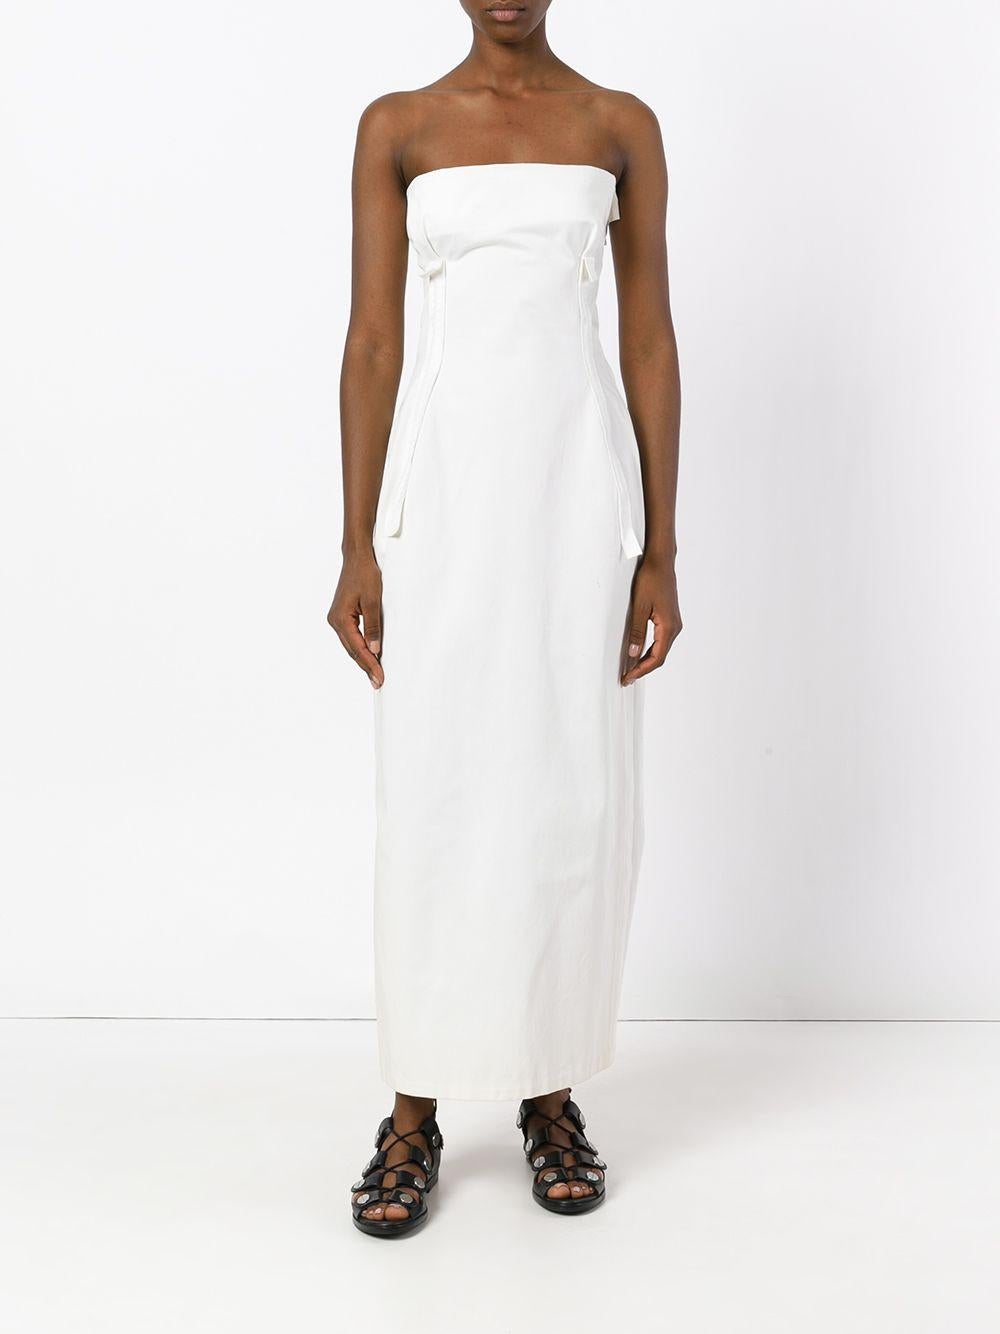 Yohji Yamamoto white cotton long dress, featuring a sleeveless band top, with fabric decorative front applications and crossed seams, silver-tone metal zip and hook side fastening. Pleated detail on the back and fabric application on the